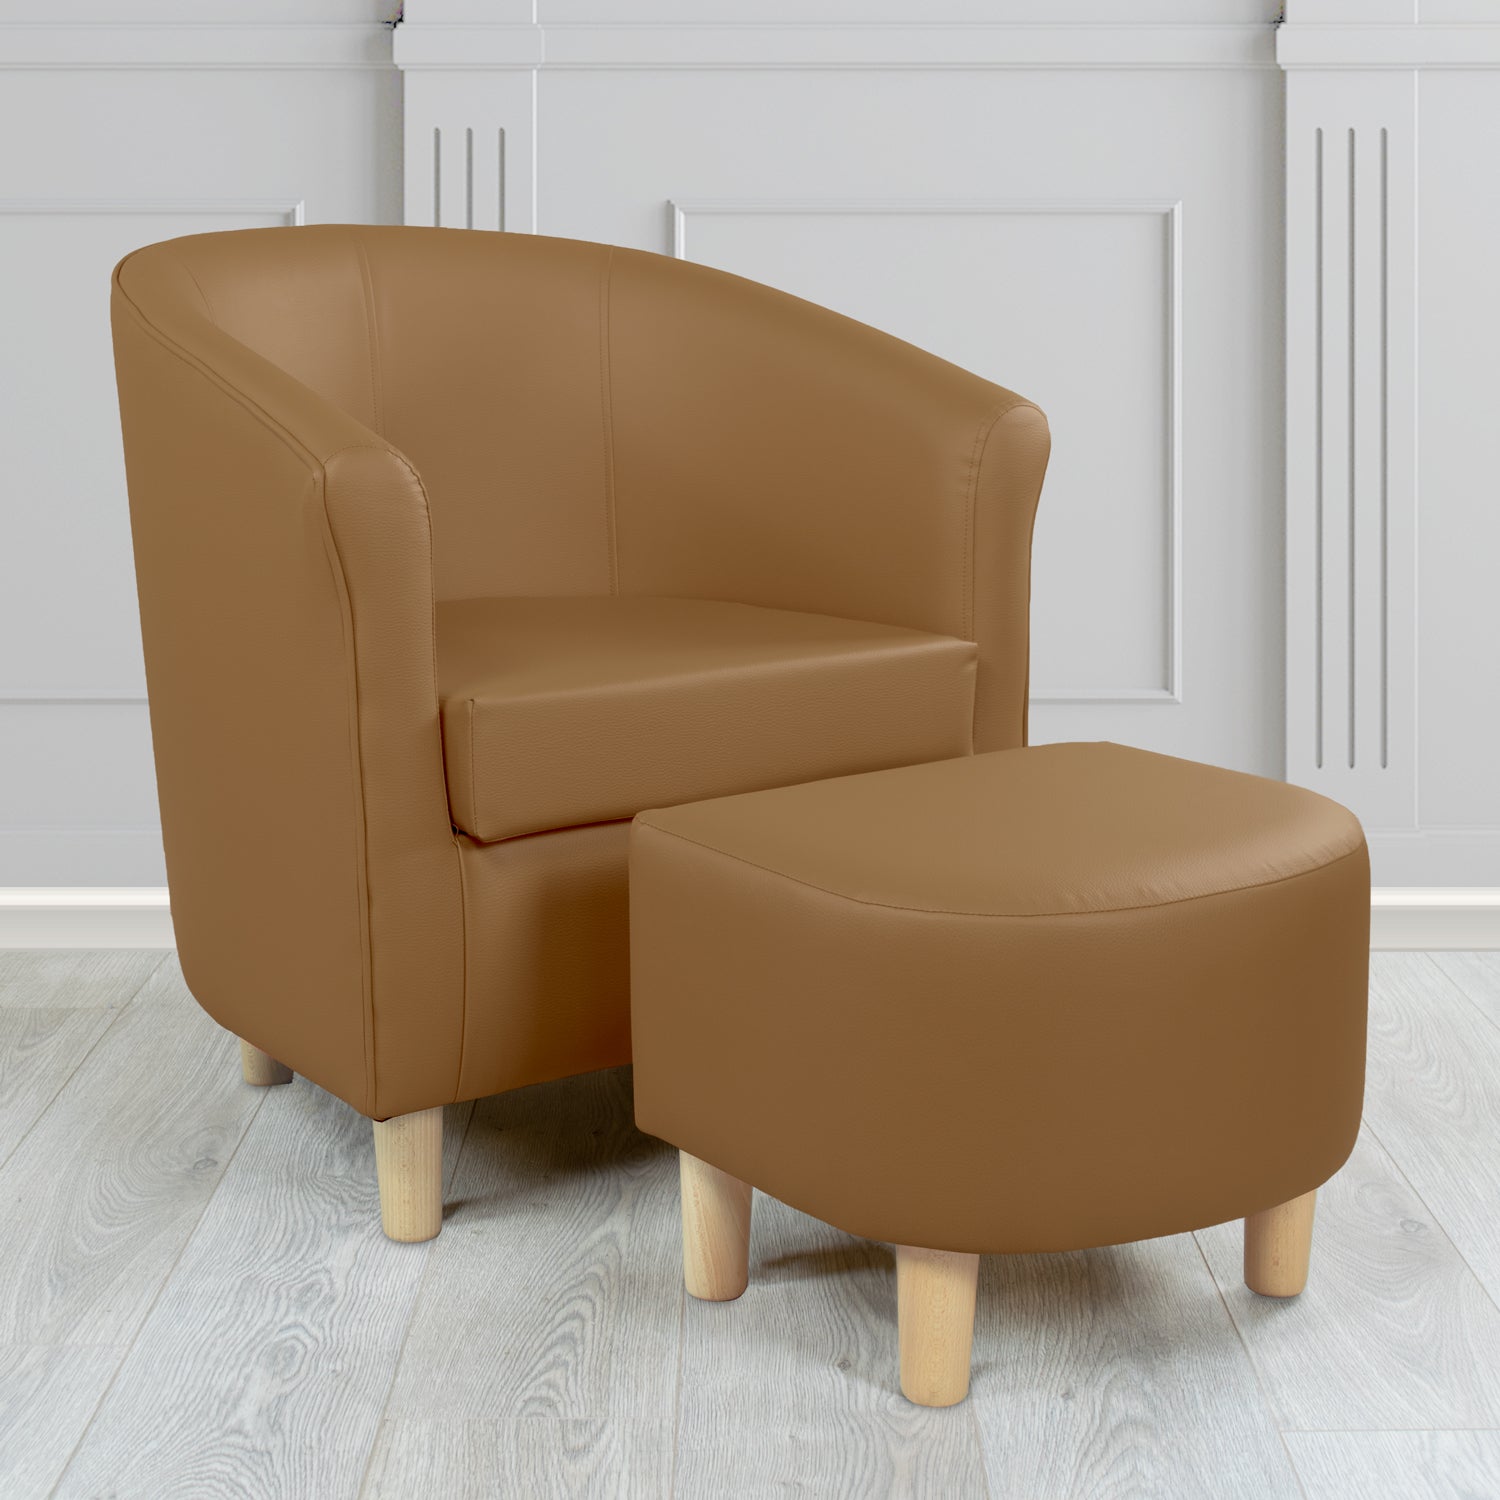 Tuscany Just Colour Nutmeg Faux Leather Tub Chair with Dee Footstool Set - The Tub Chair Shop